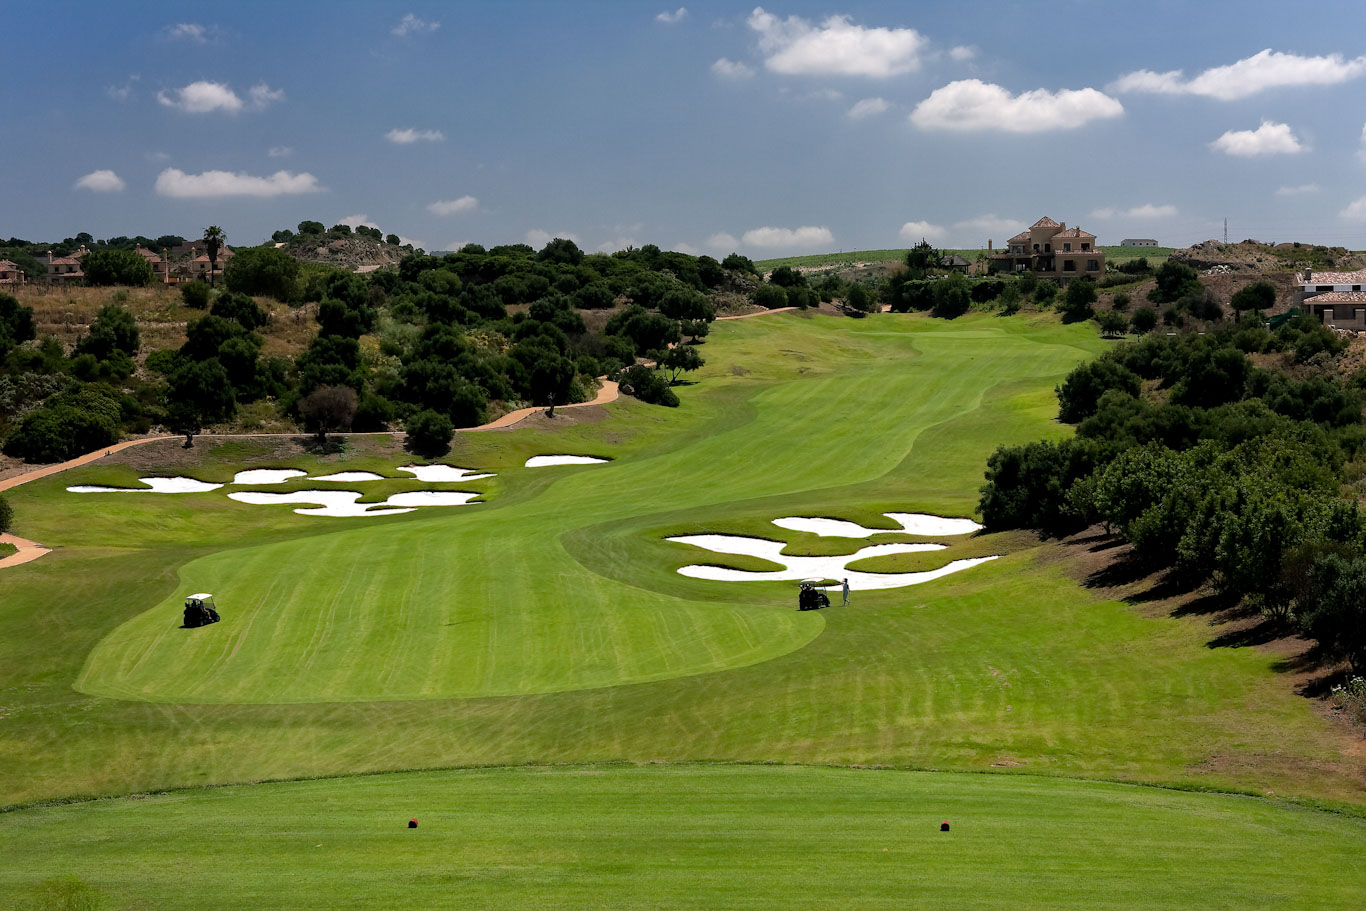 The fourth hole at Montecastillo Golf course, Jerez, Spain